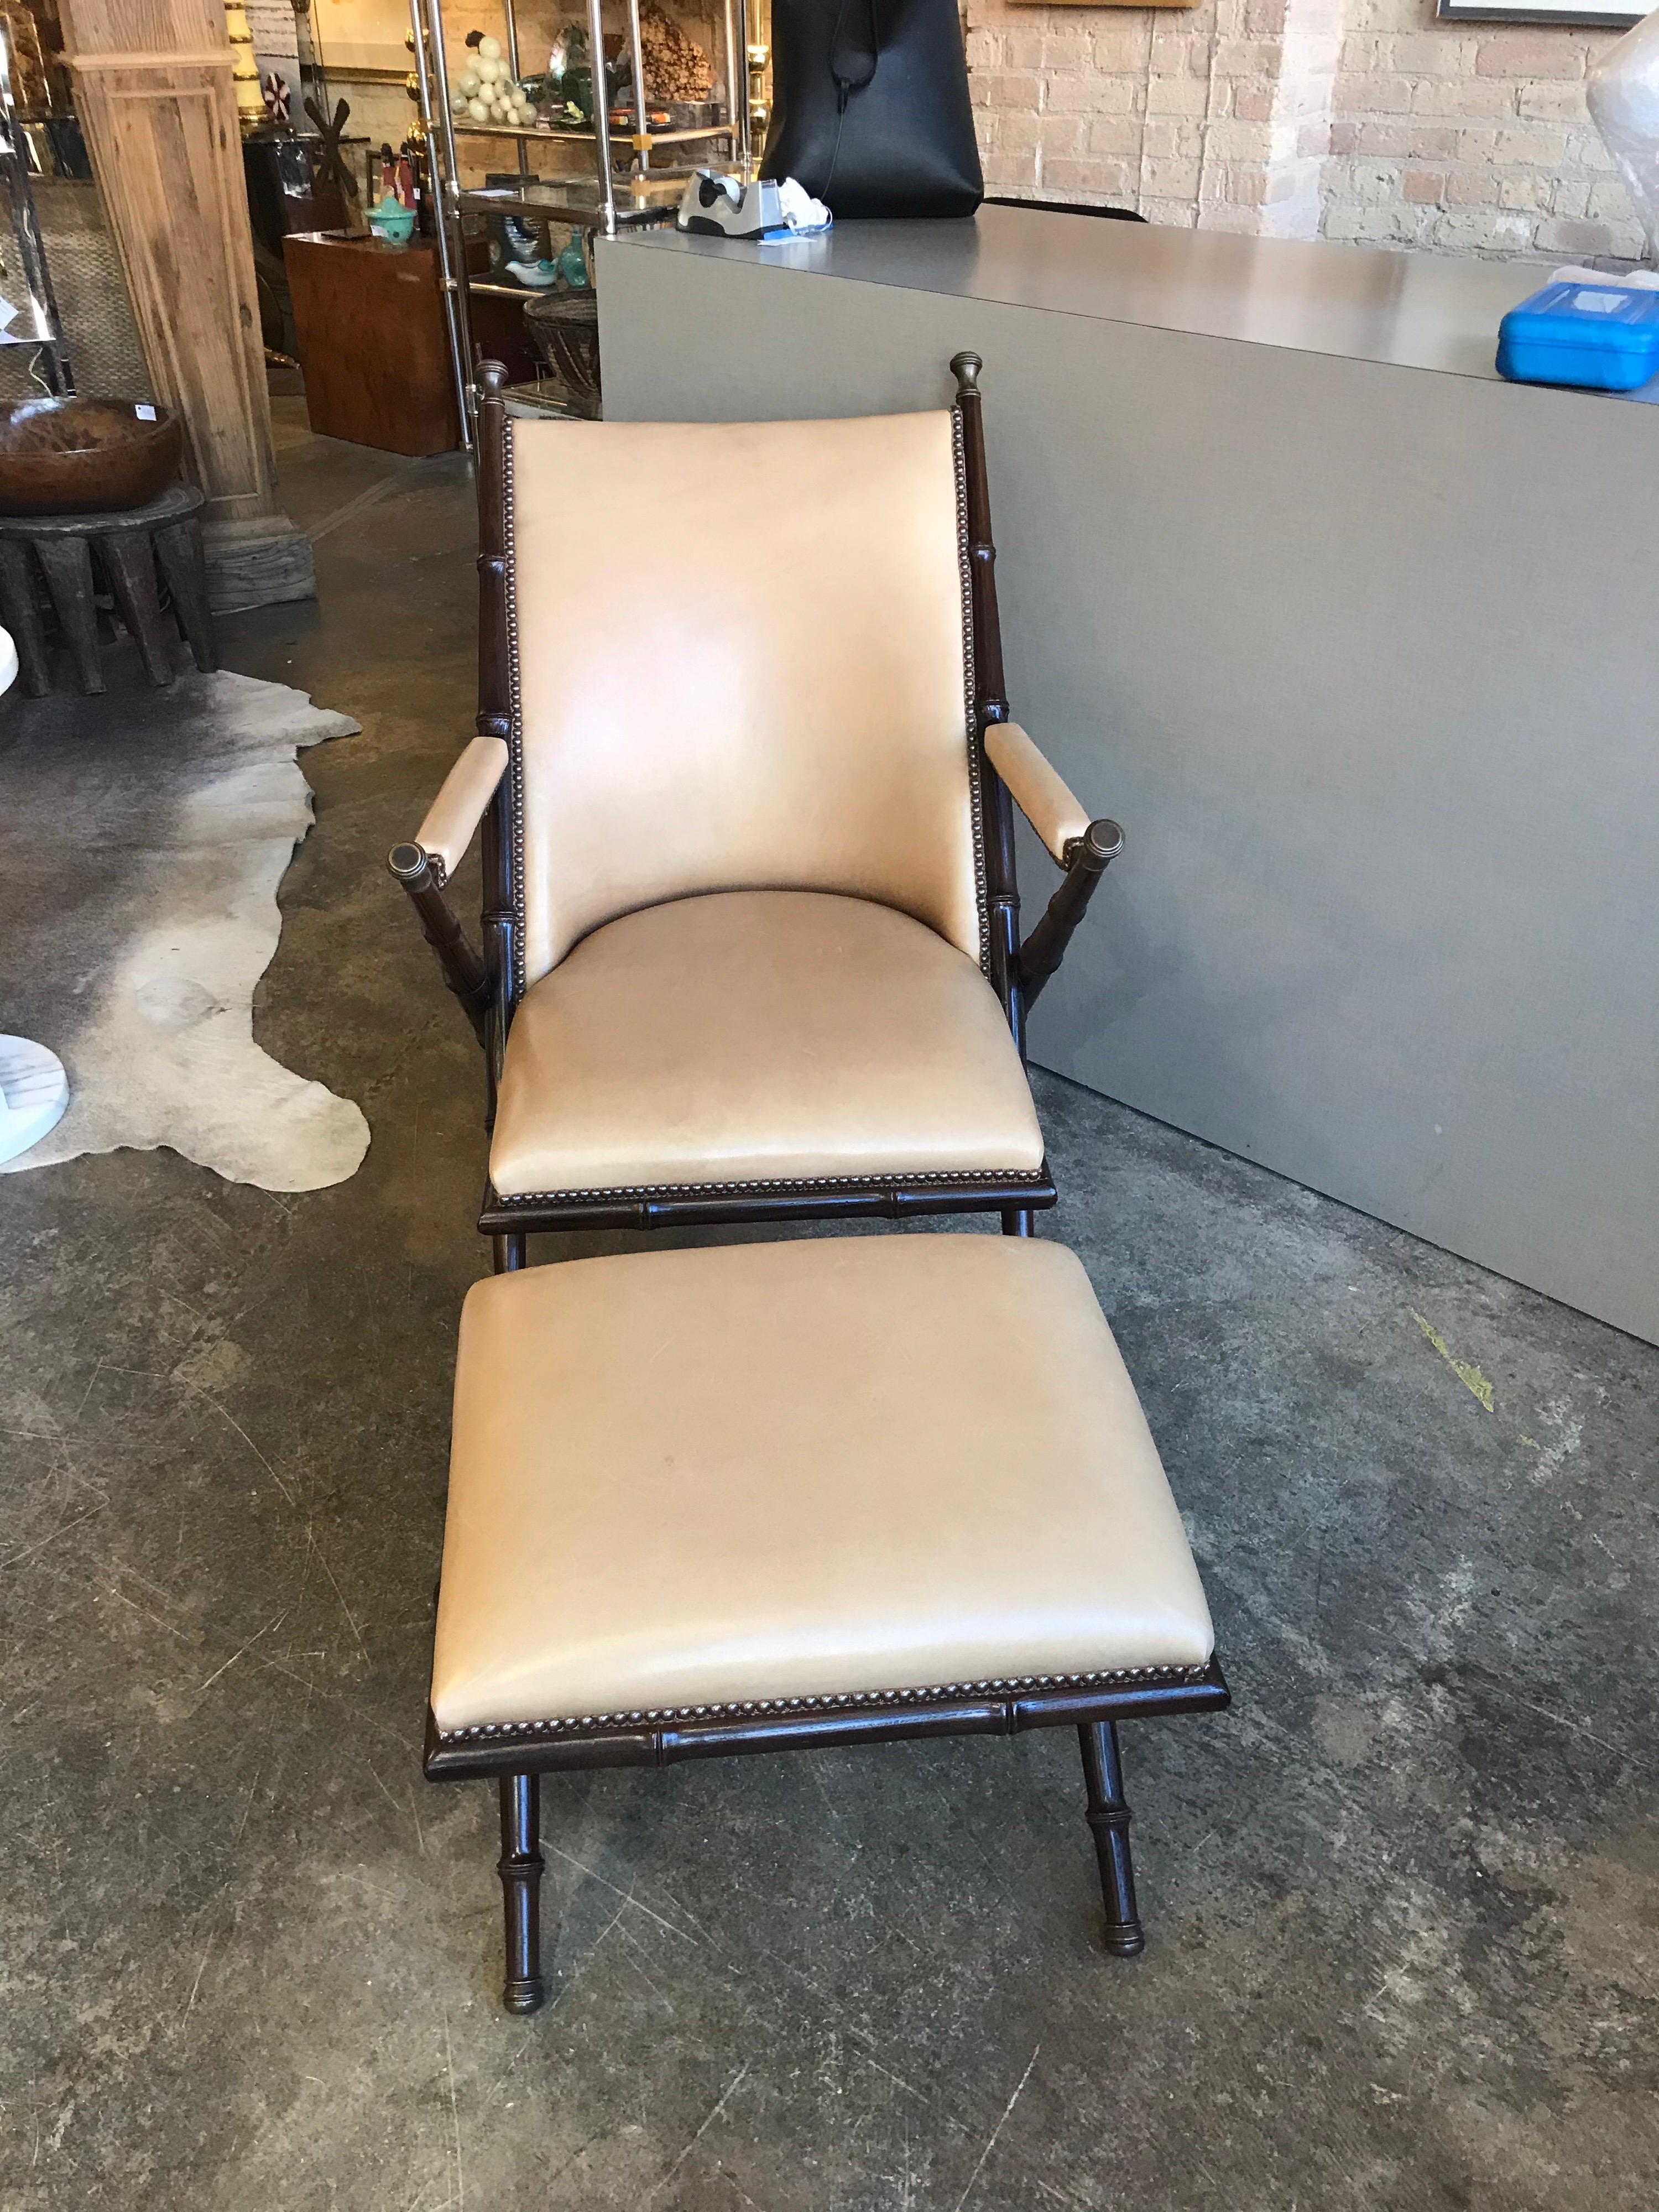 This is a vintage wooden lounge chair with brass caps and decorative elements and leather upholstery. It has a matching leather ottoman and is made by the Hickory Chair Co. North Carolina.